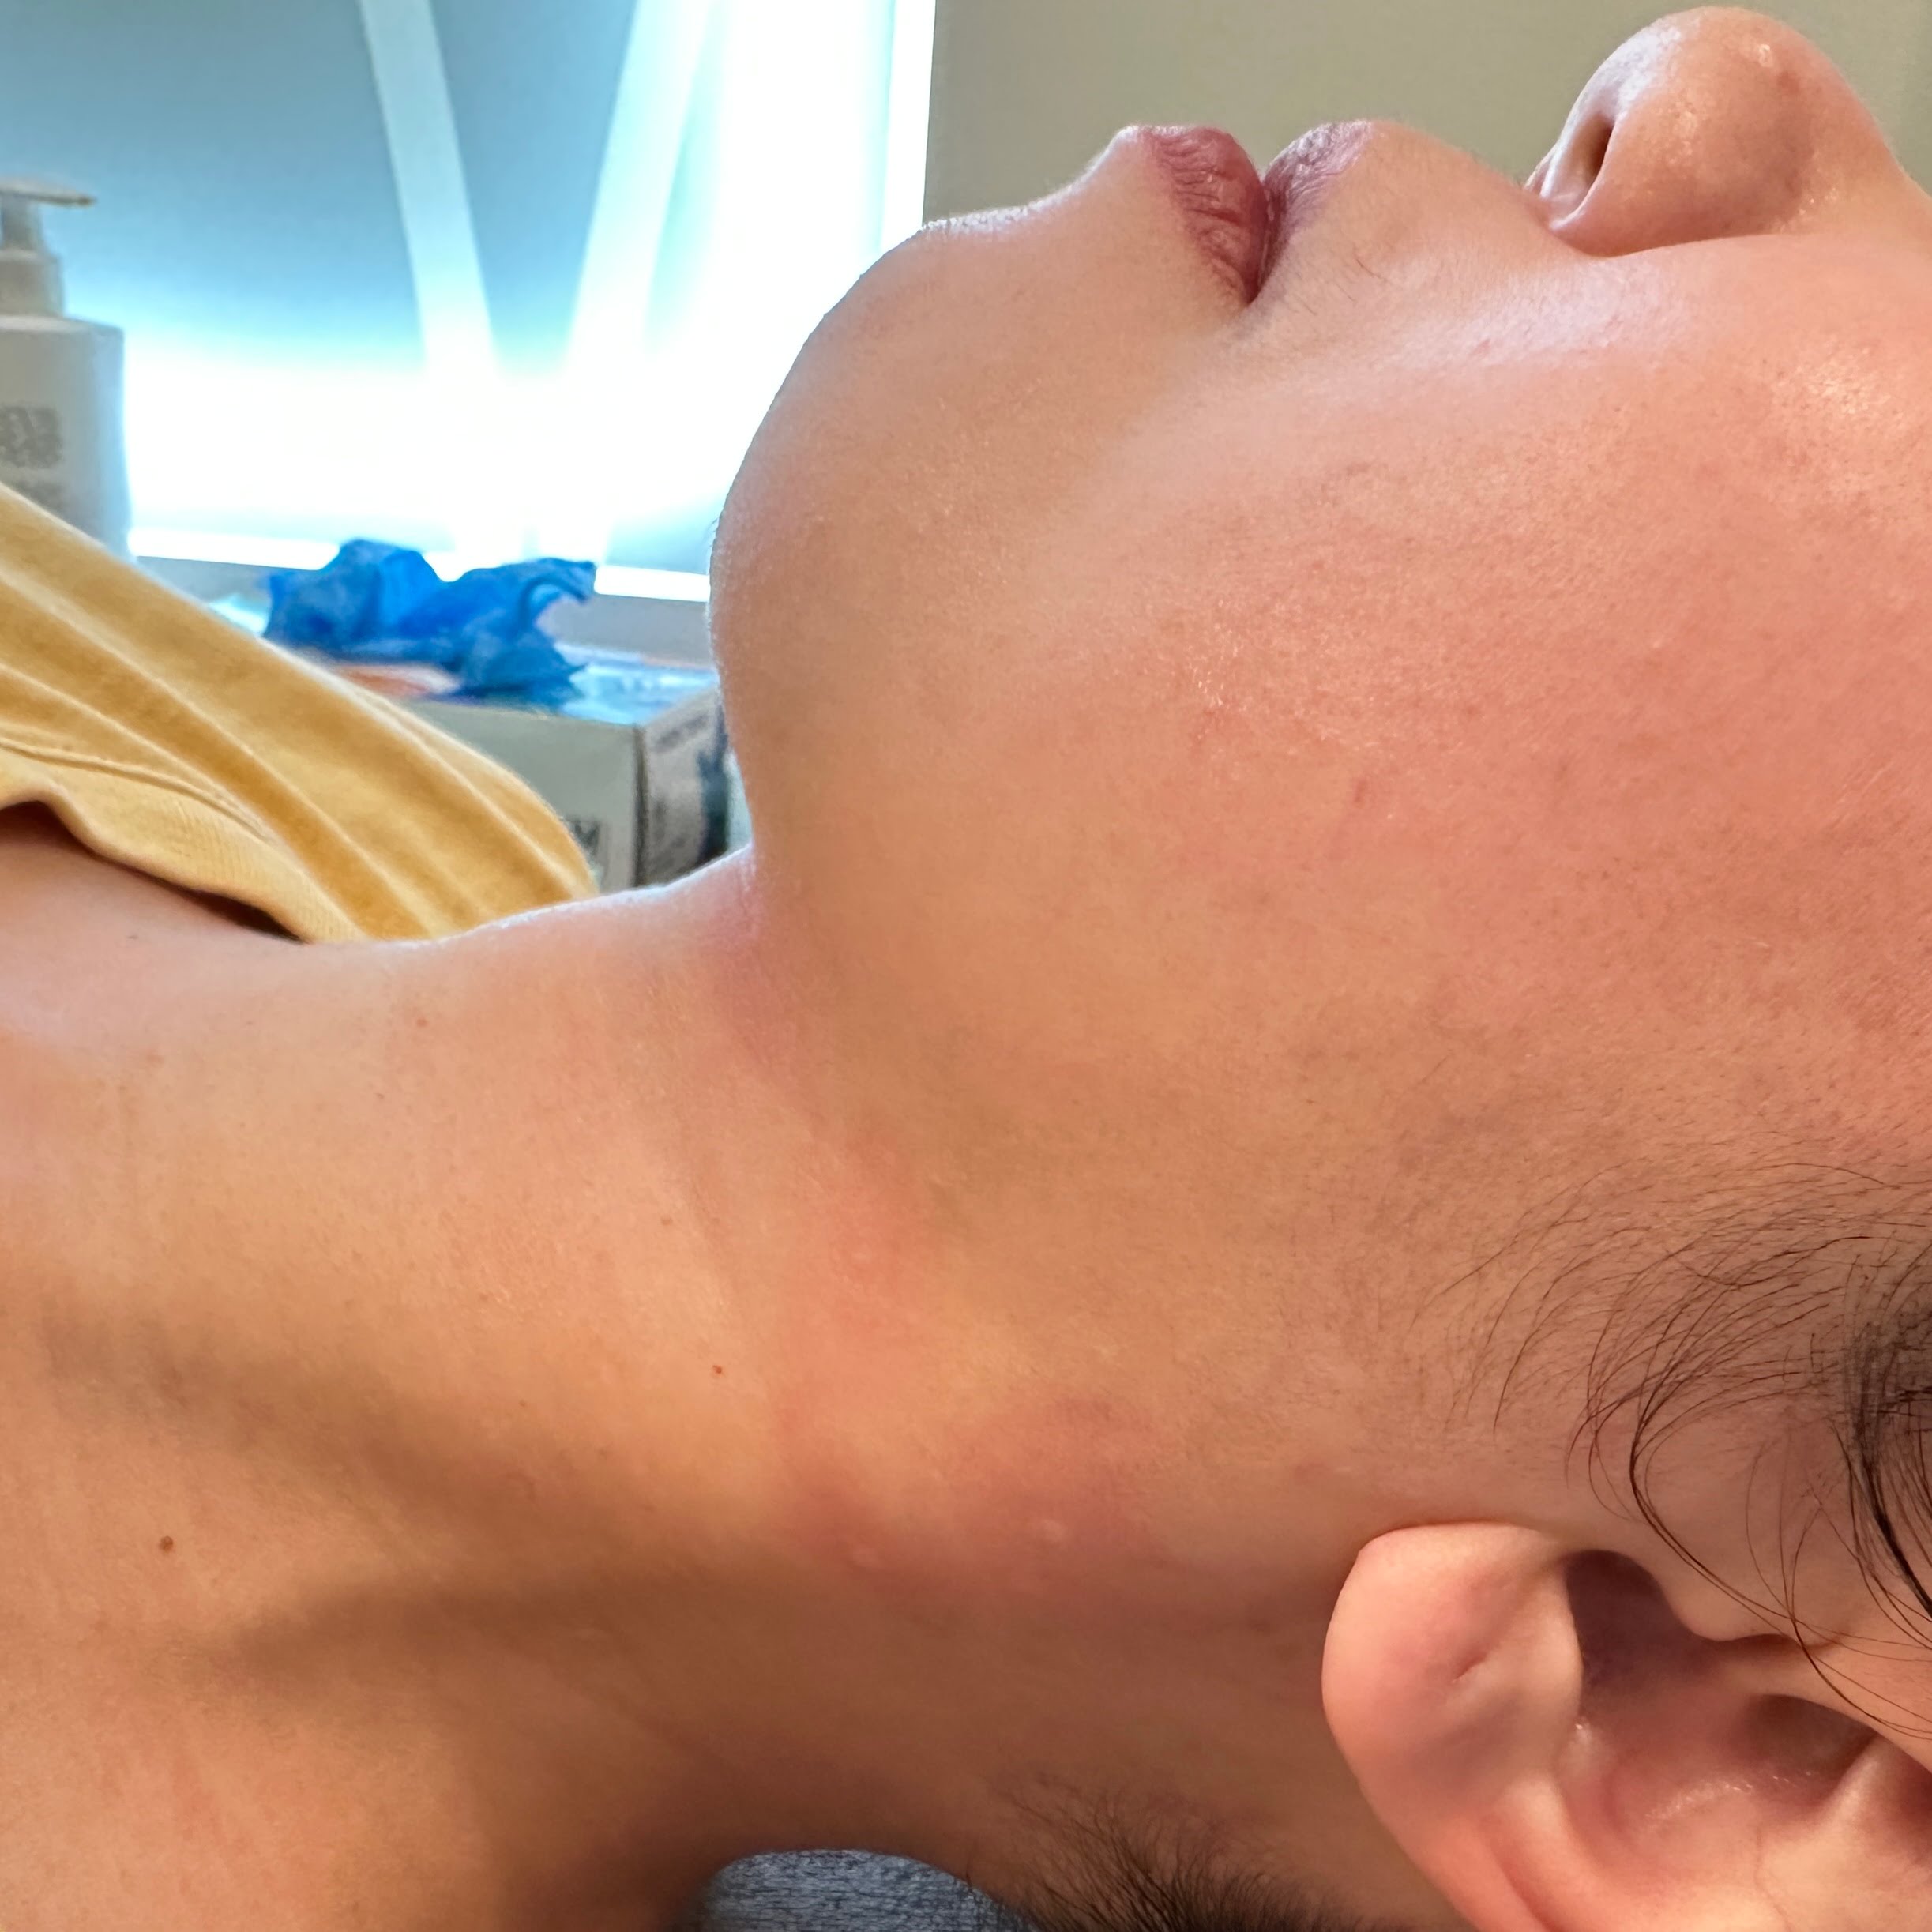 Client after Ultraformer III double chin treatment, with tightened and lifted jaw and skin.